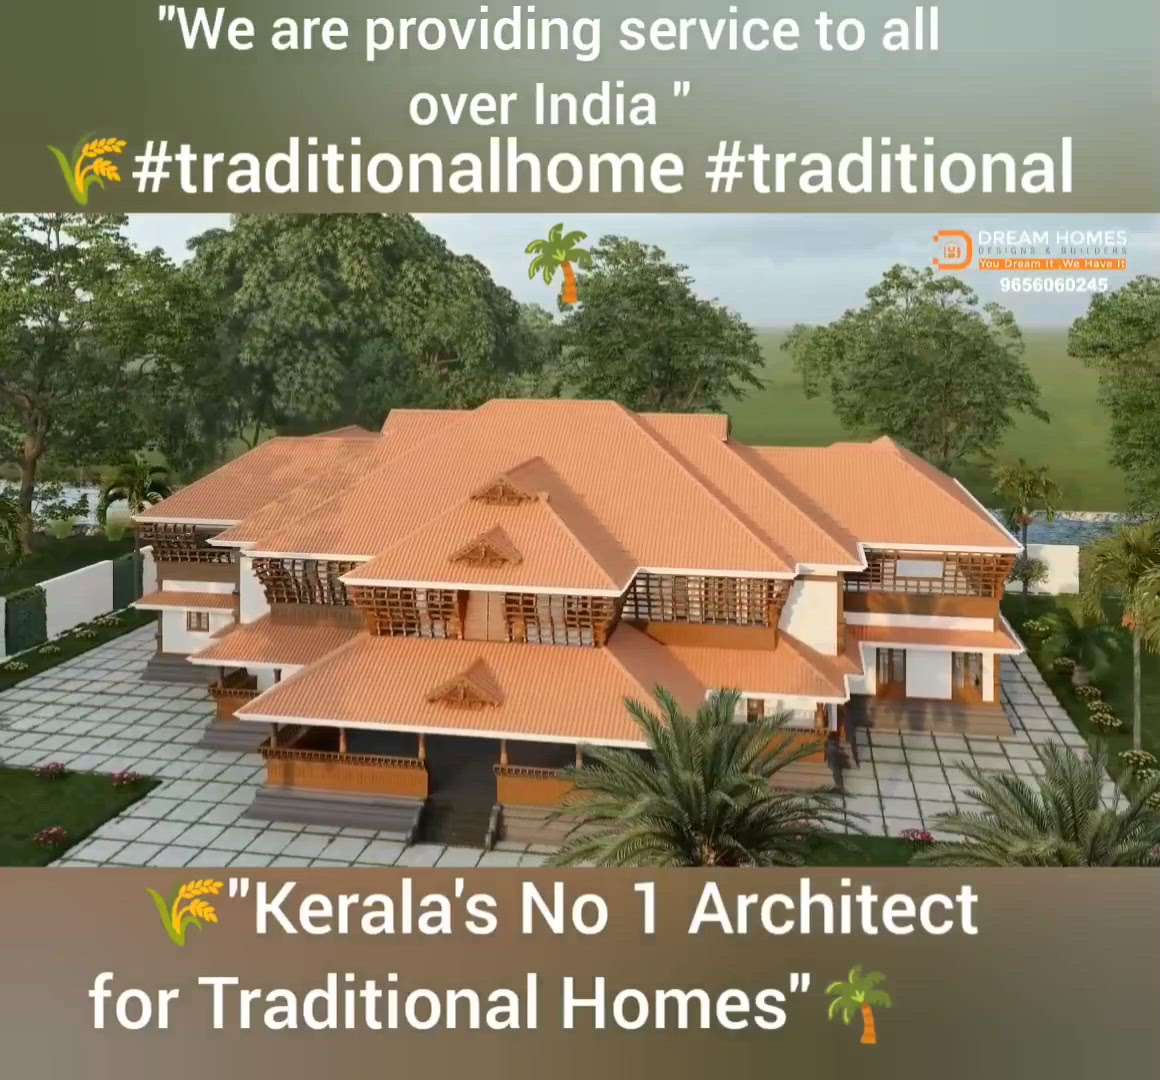 "DREAM HOMES DESIGNS & BUILDERS "
You Dream It, We Have It'
      "Kerala's No 1 Architect for Traditional Homes"

#traditionalhome 

We are providing service to all over India 
No Compromise on Quality, Sincerity & Efficiency.
#traditionalhome #traditional 
www.dreamhomesbuilders.com
For more info
9656060245
7902453187